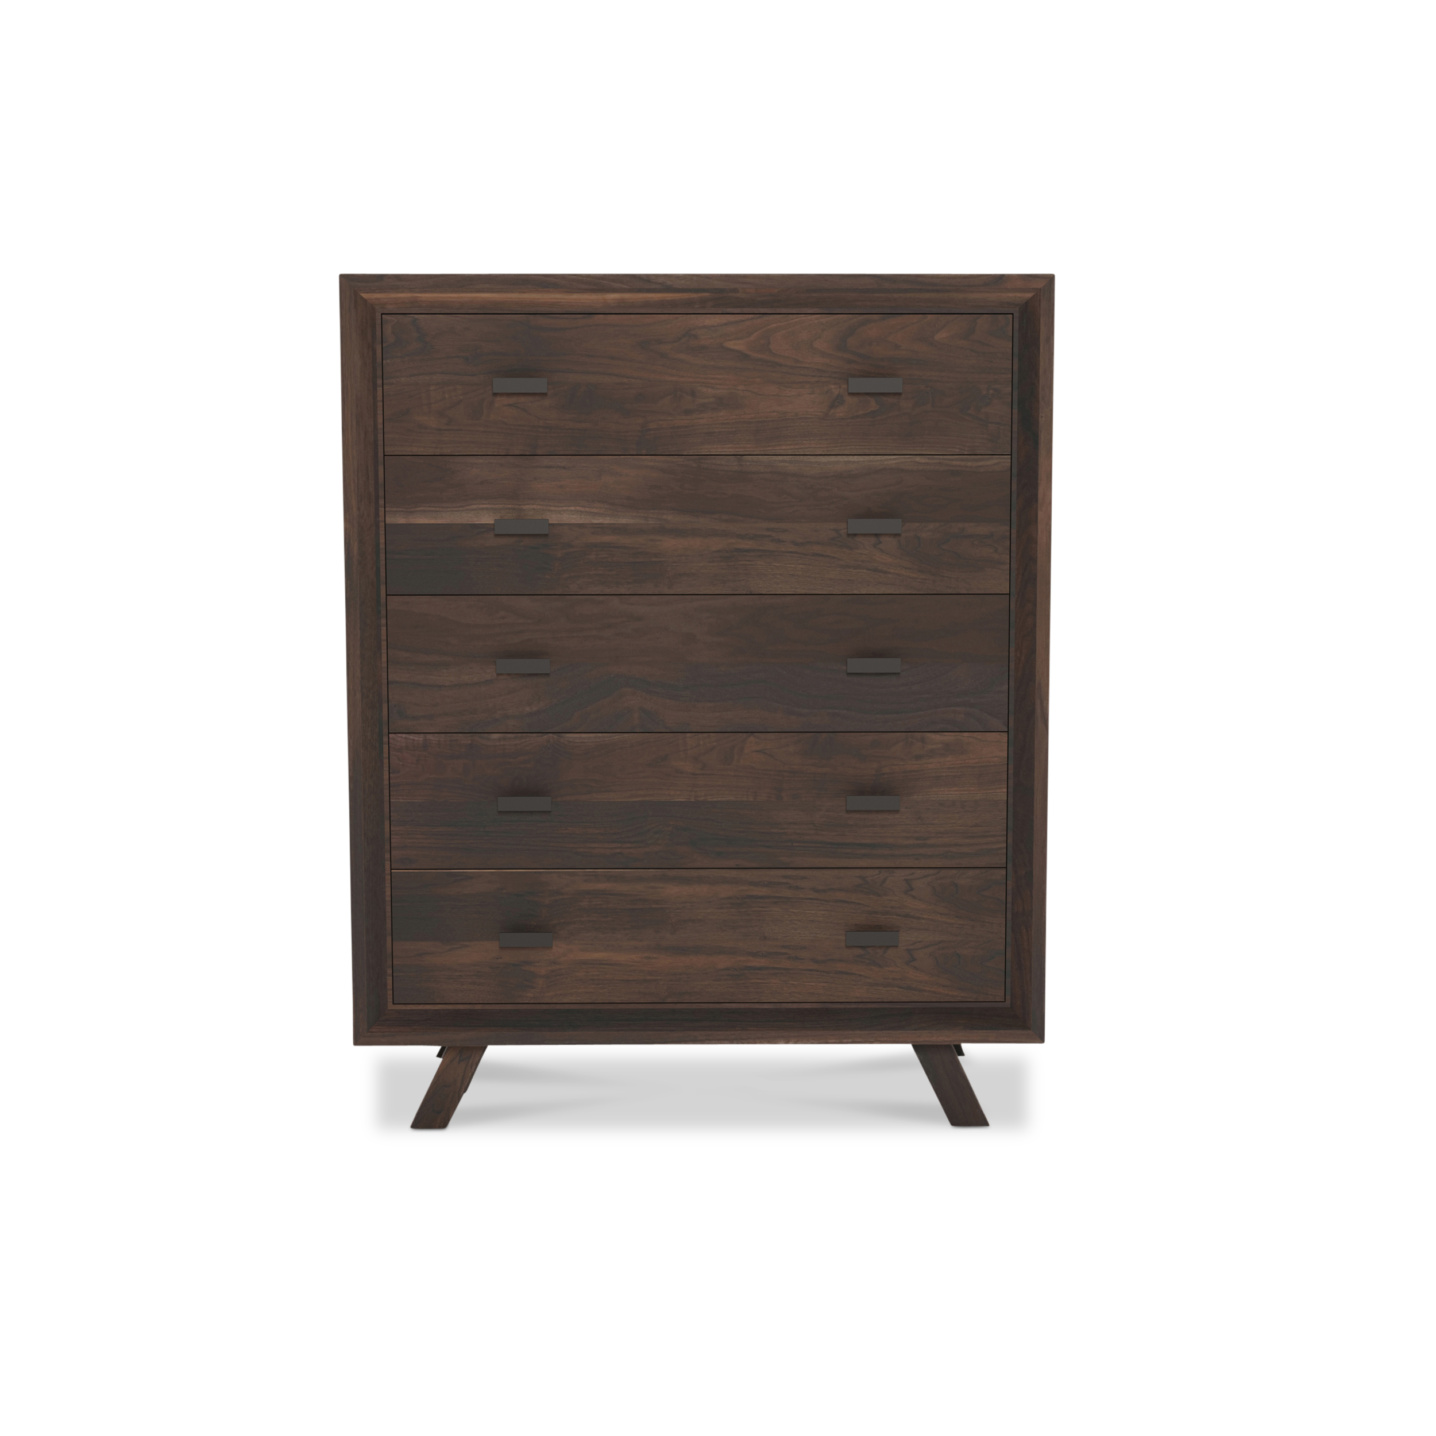 Tall solid walnut dresser with 5 drawers